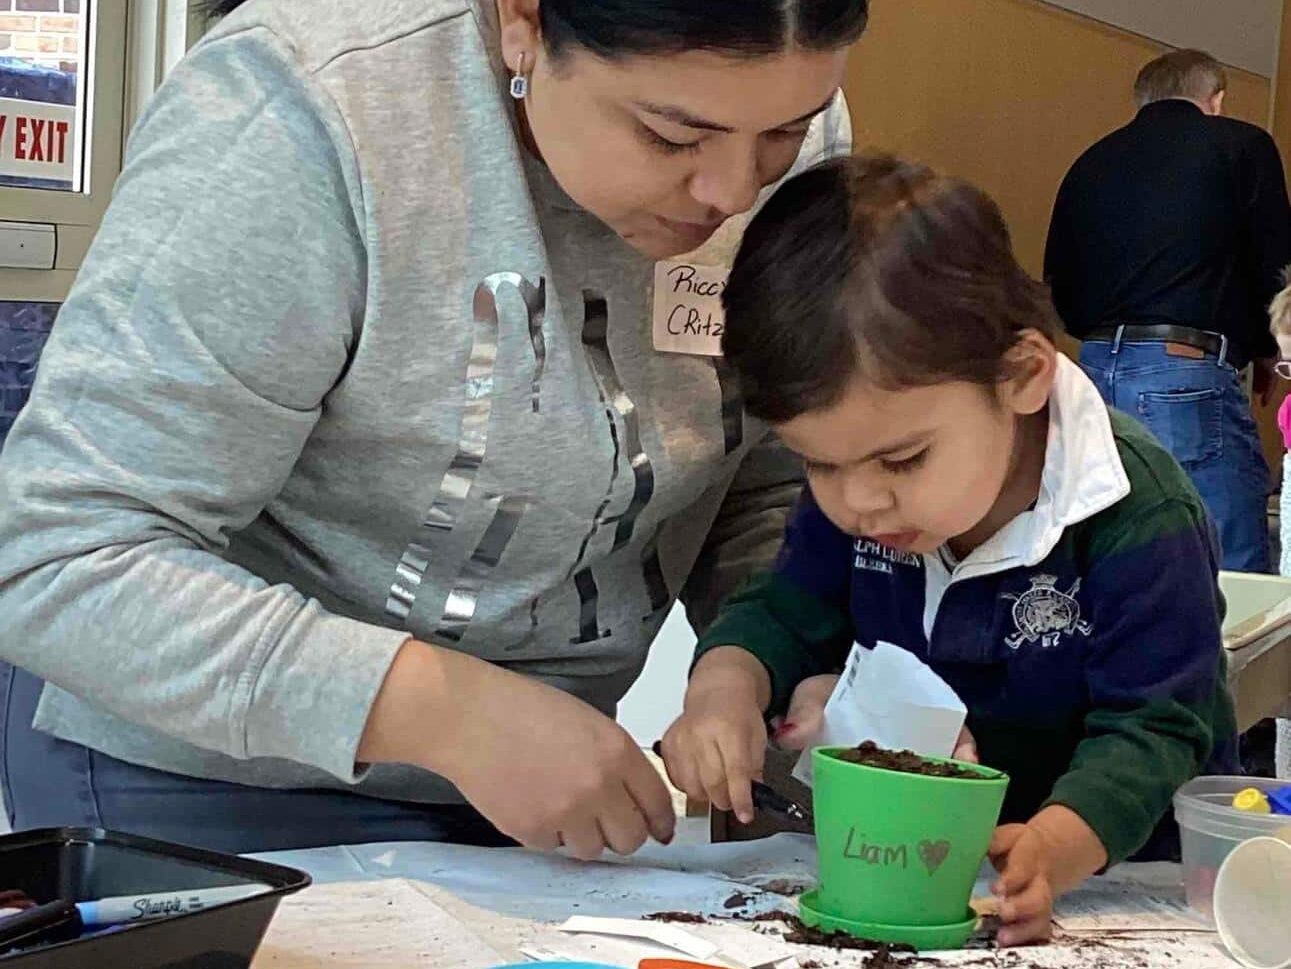 Latina mother and toddler child work on an art project